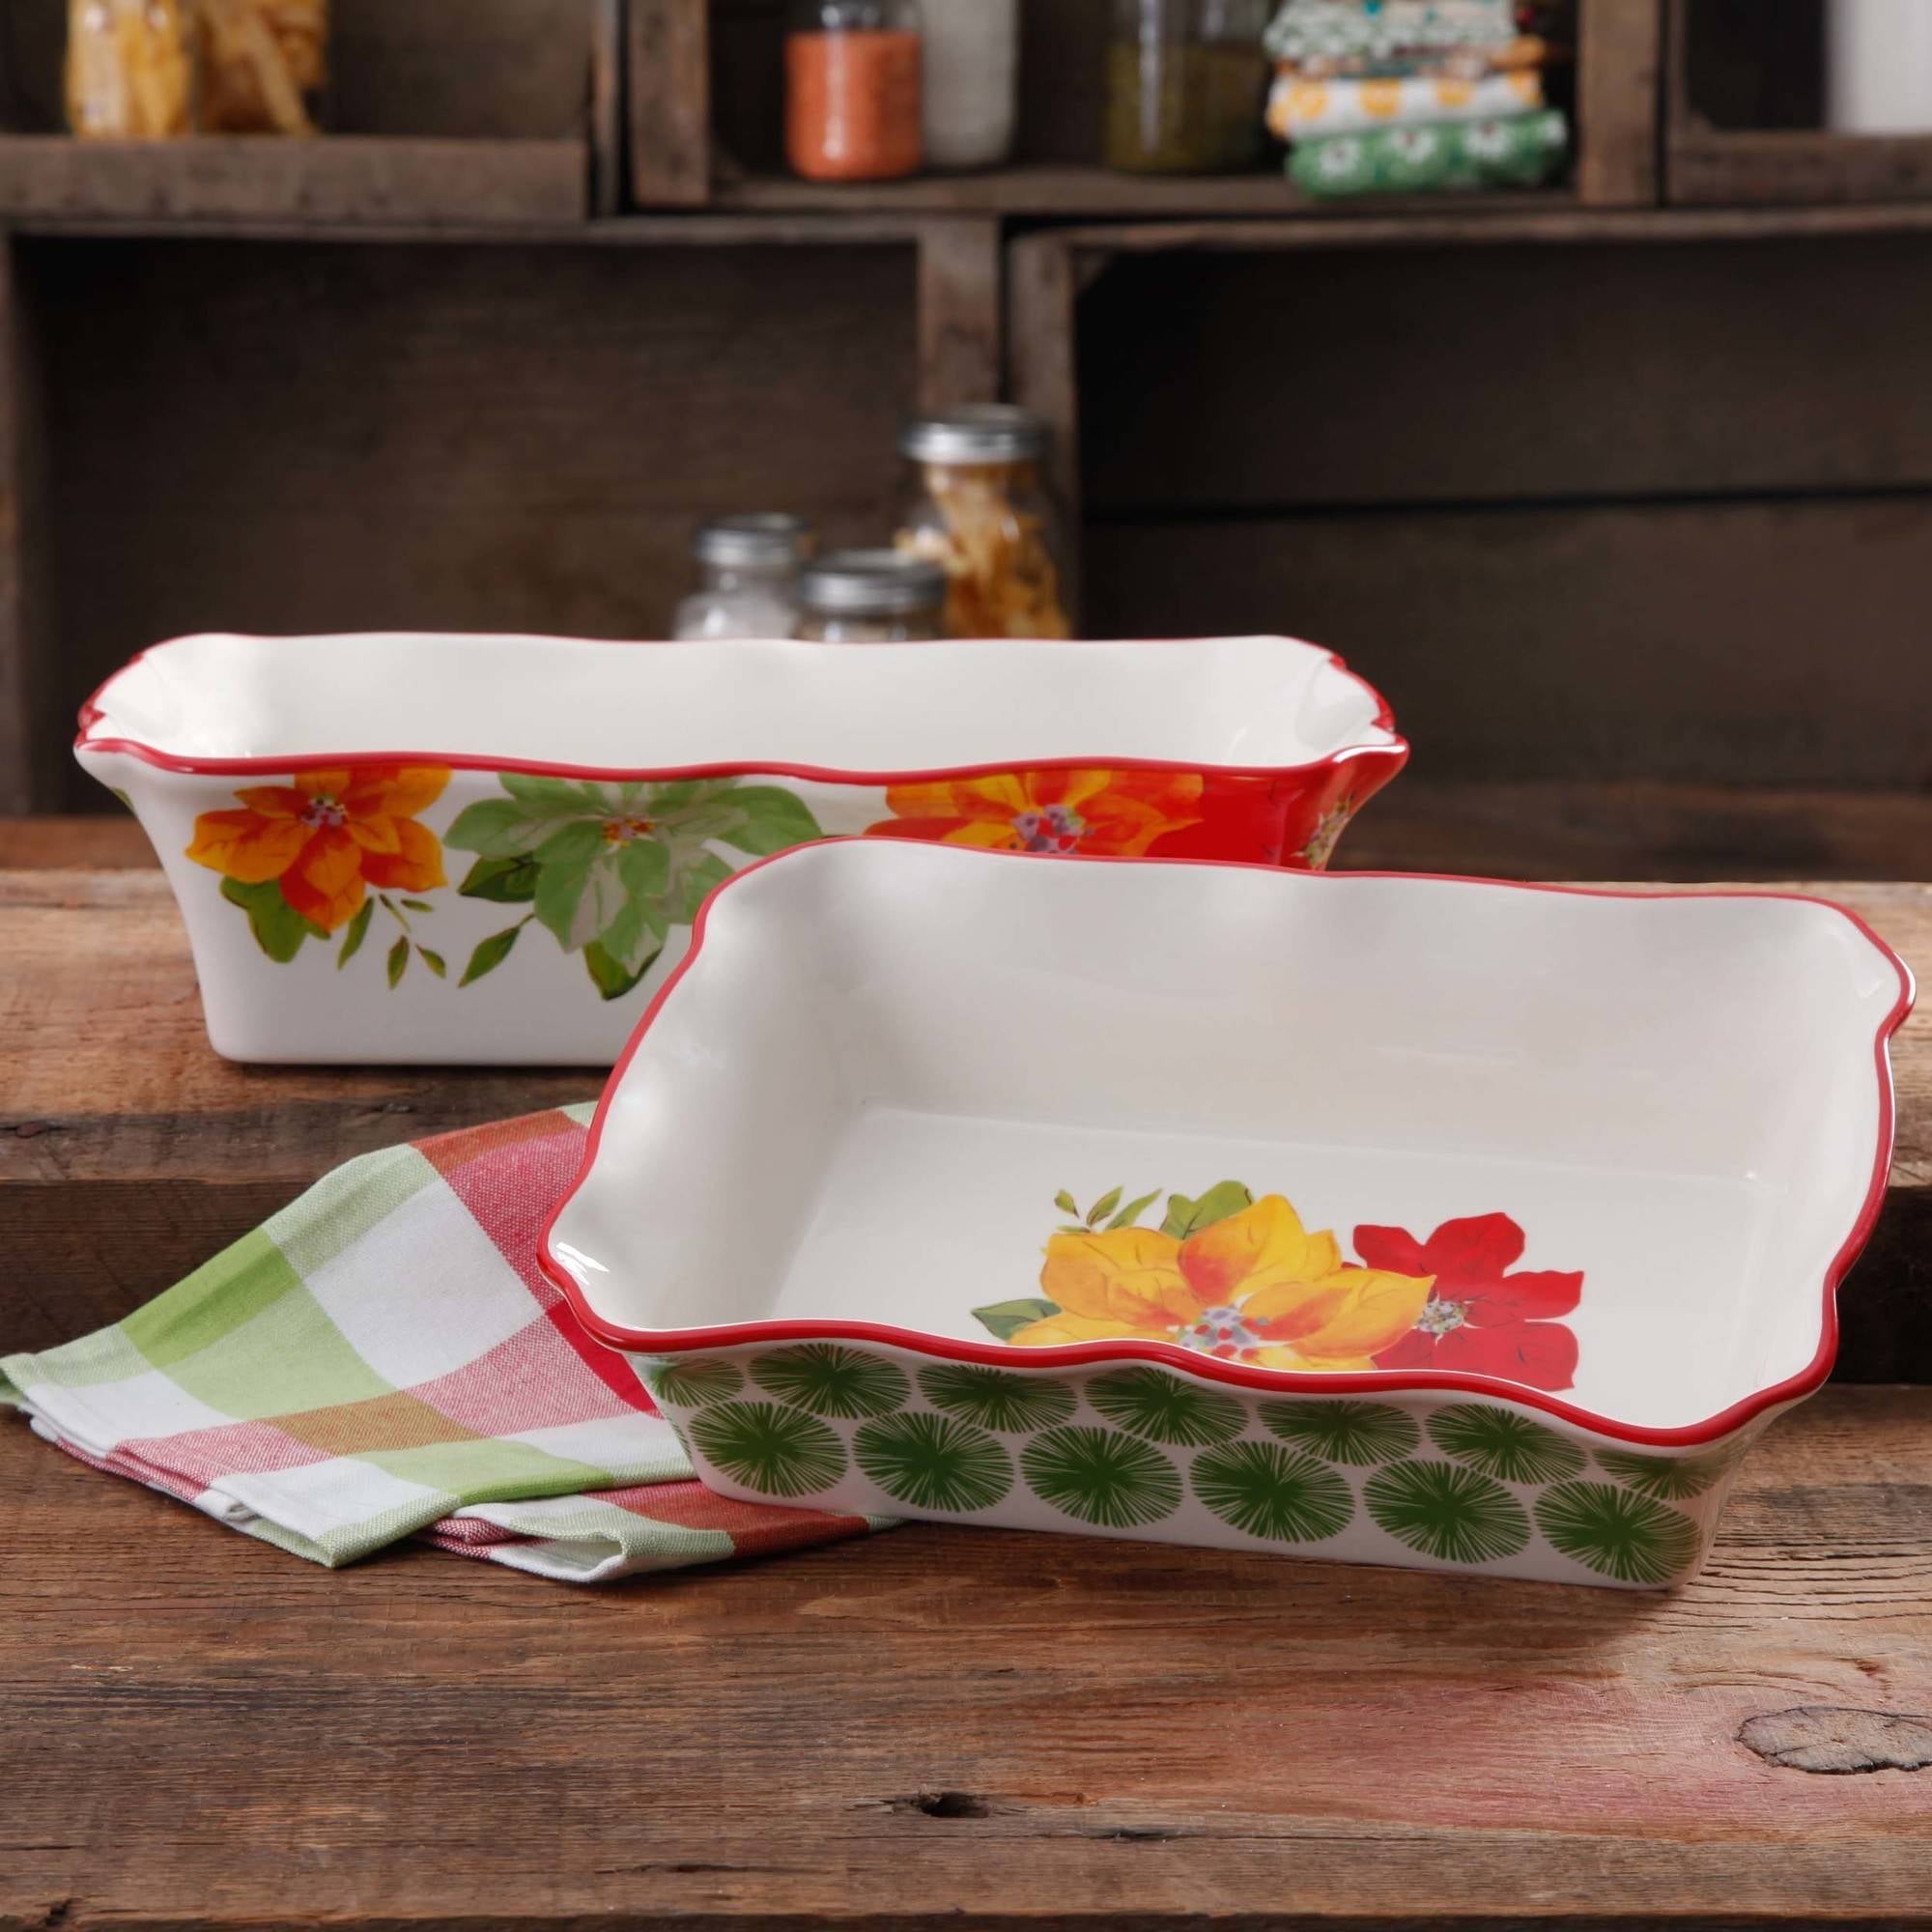 The Pioneer Woman Flea Market Decorated 9 Ruffle Top Pie Plate and 2.3 Quart Ruffle Top Bakeware 